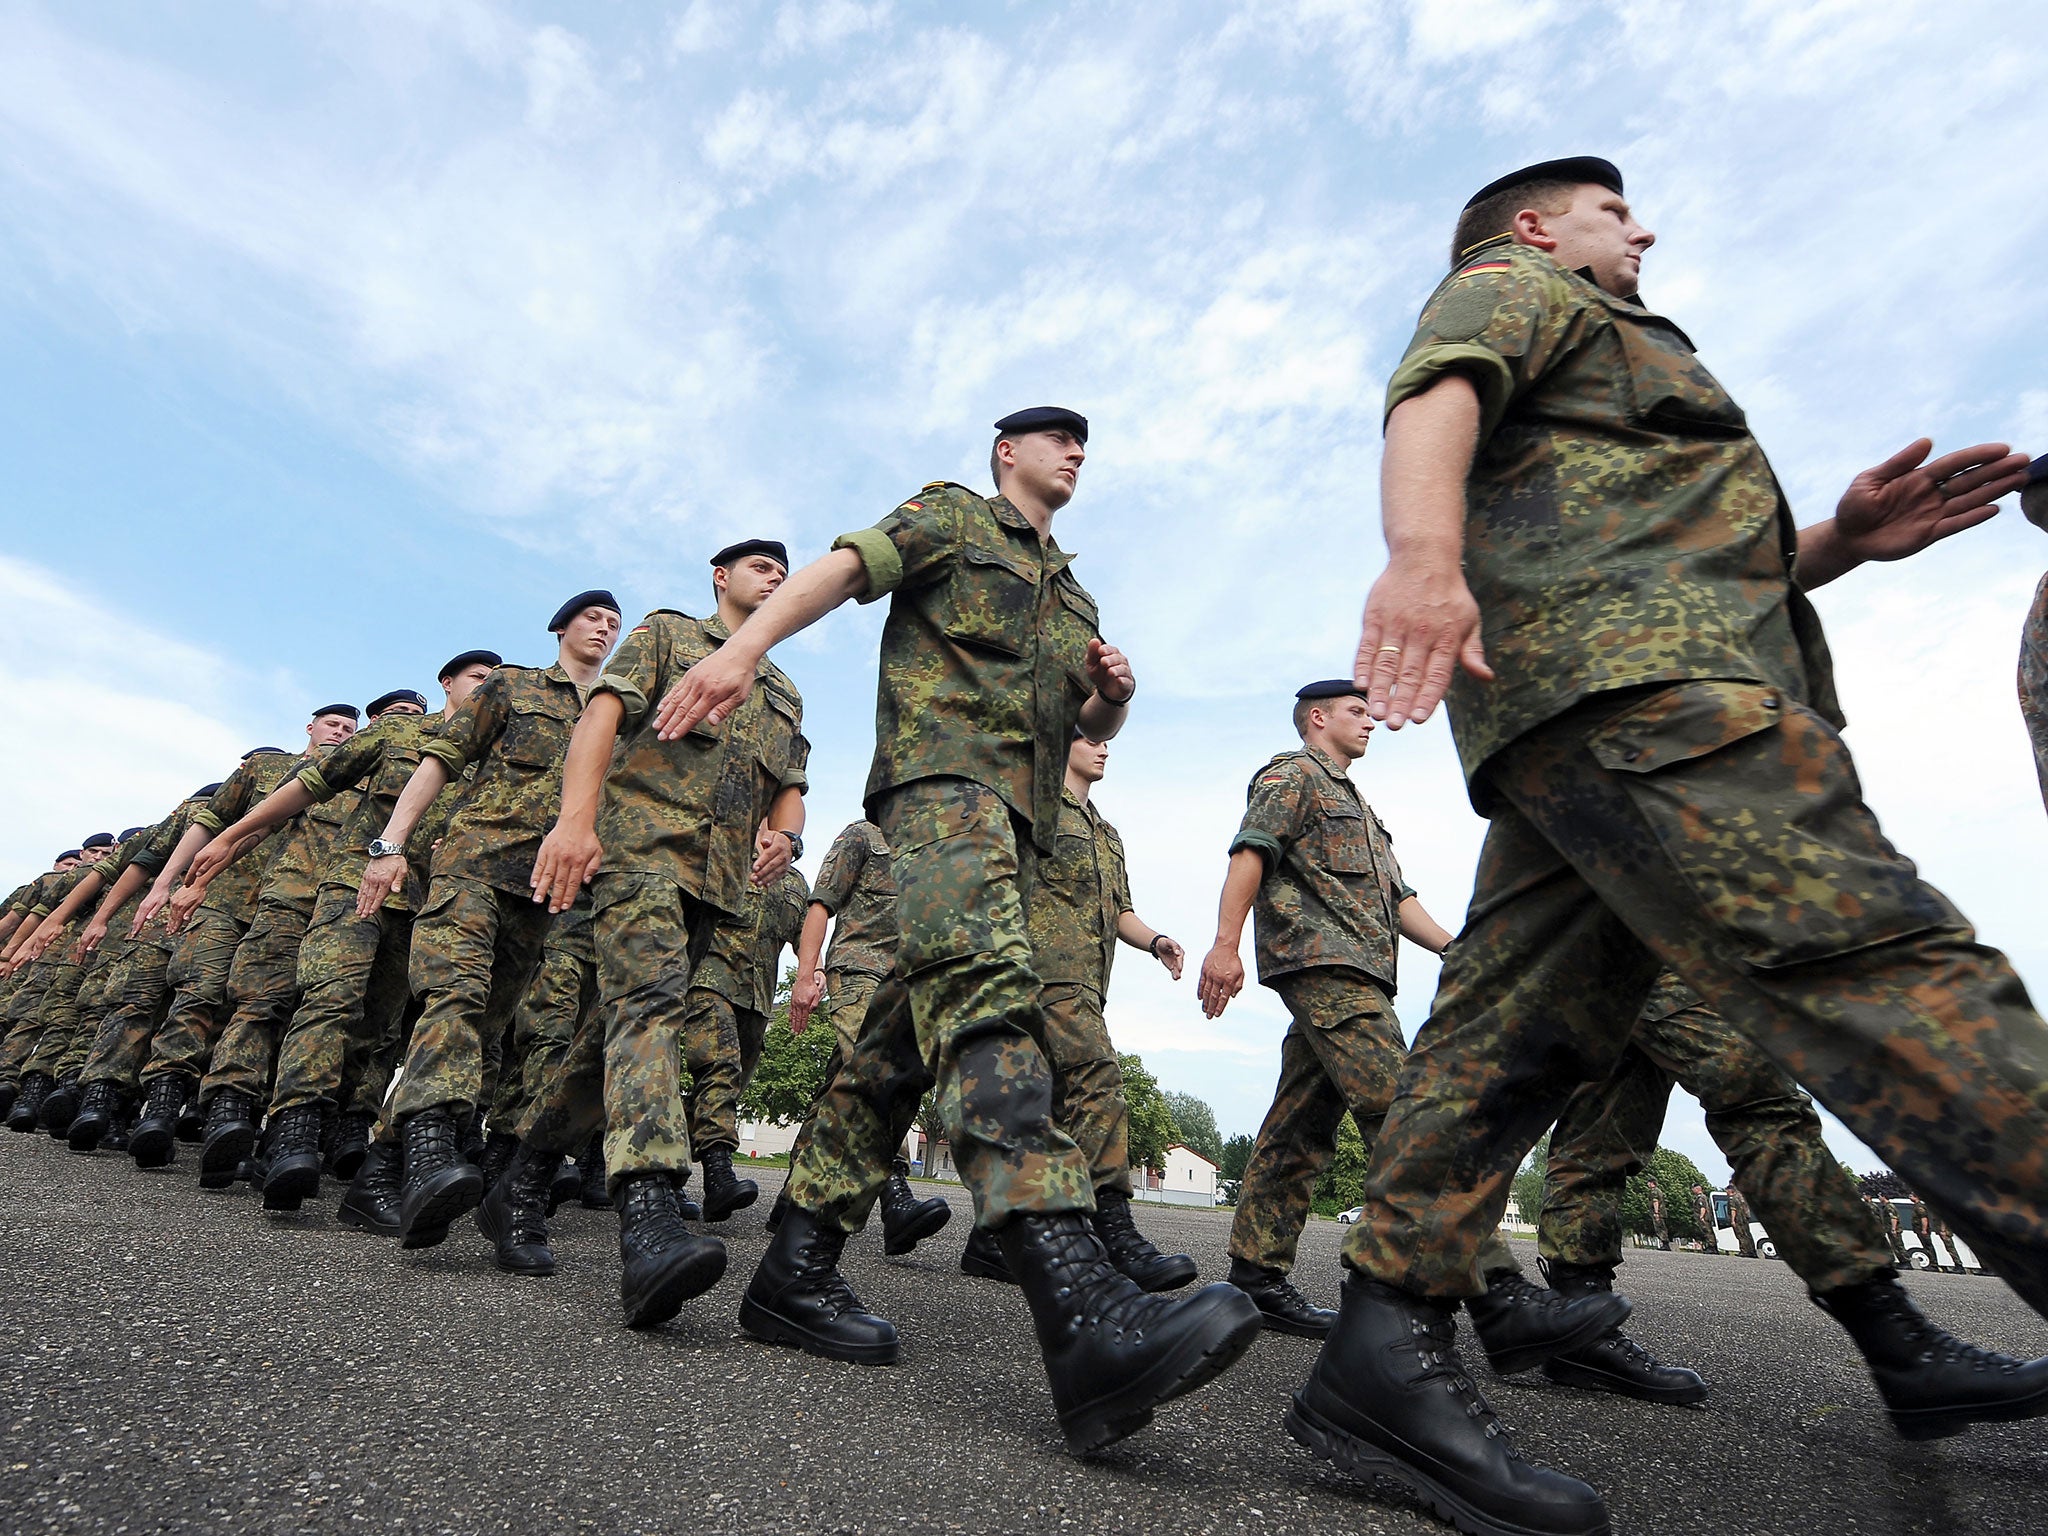 German soldiers of the 291st Jagerbataillon take part in a military ceremony on 5 July 2012 in Illkirch-Graffenstaden, eastern France.